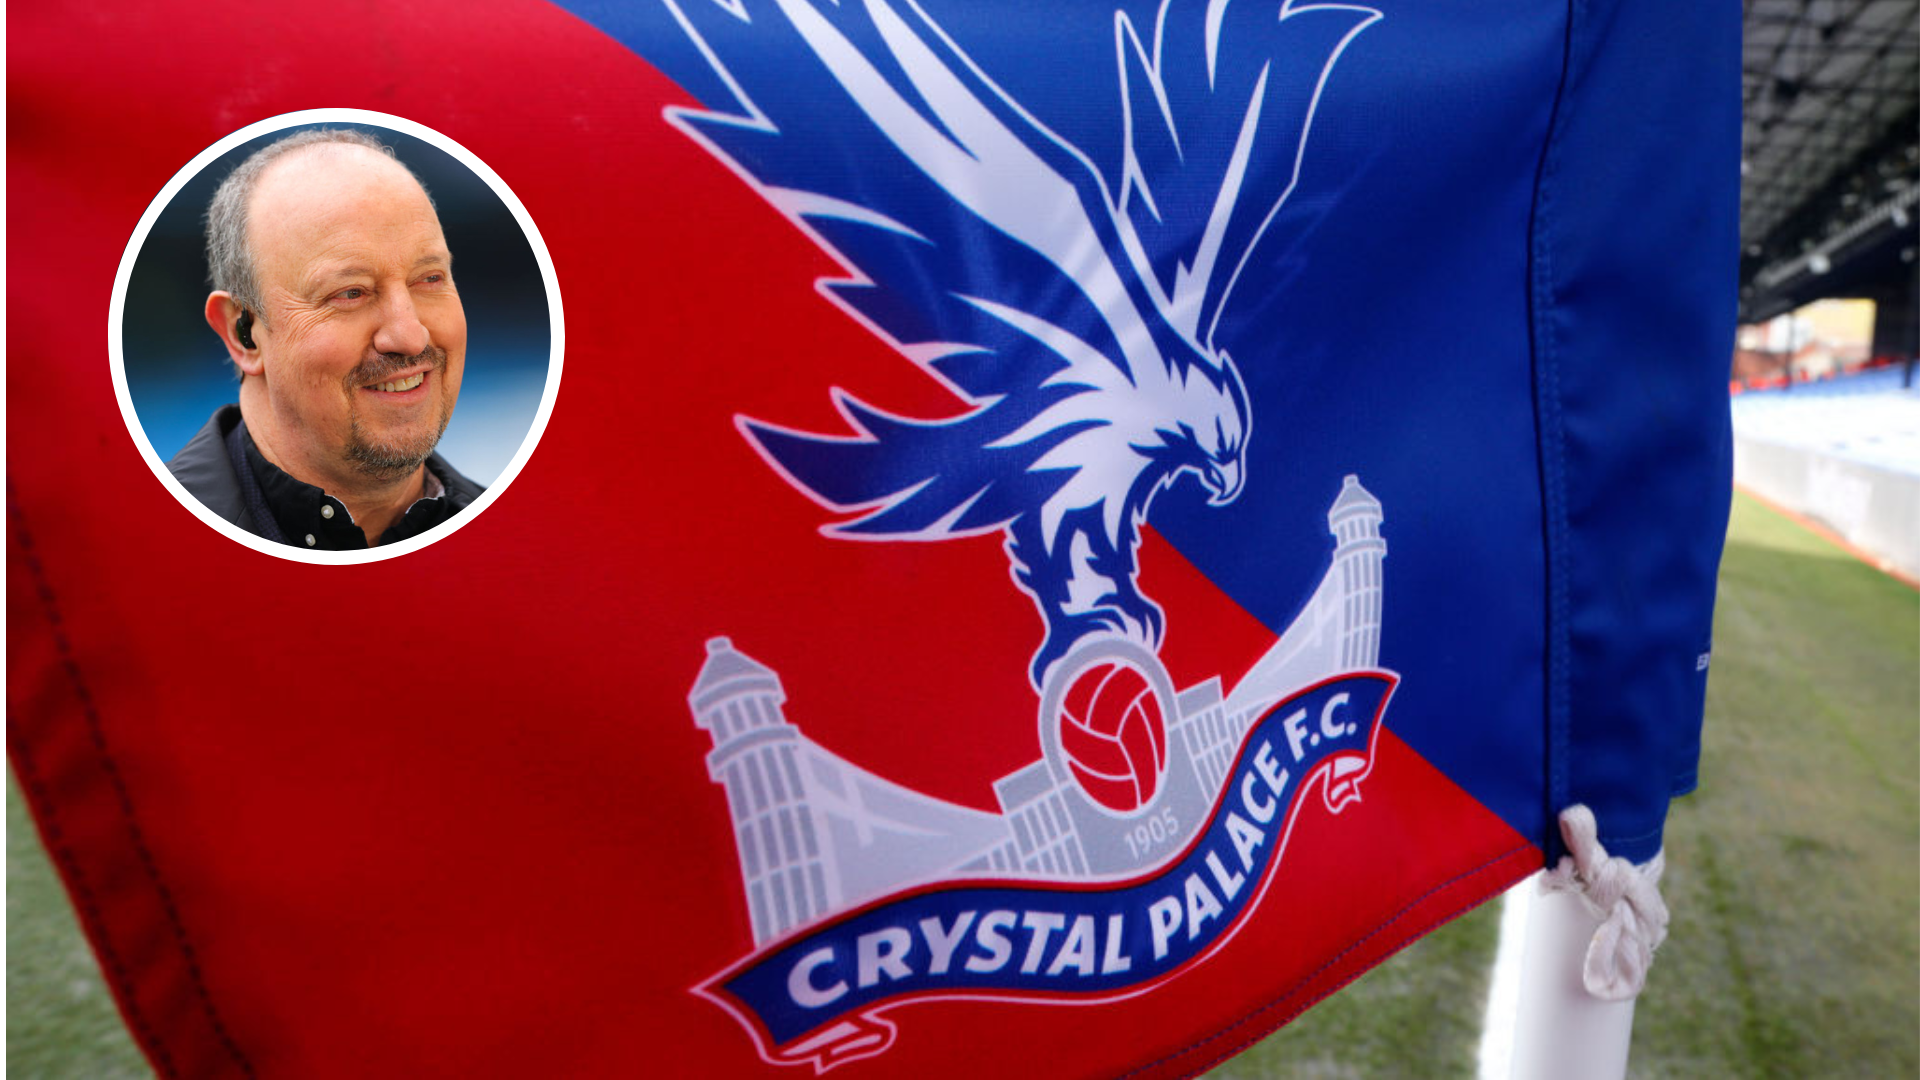 Who will be the next Crystal Palace manager? Rafa Benitez favourite to